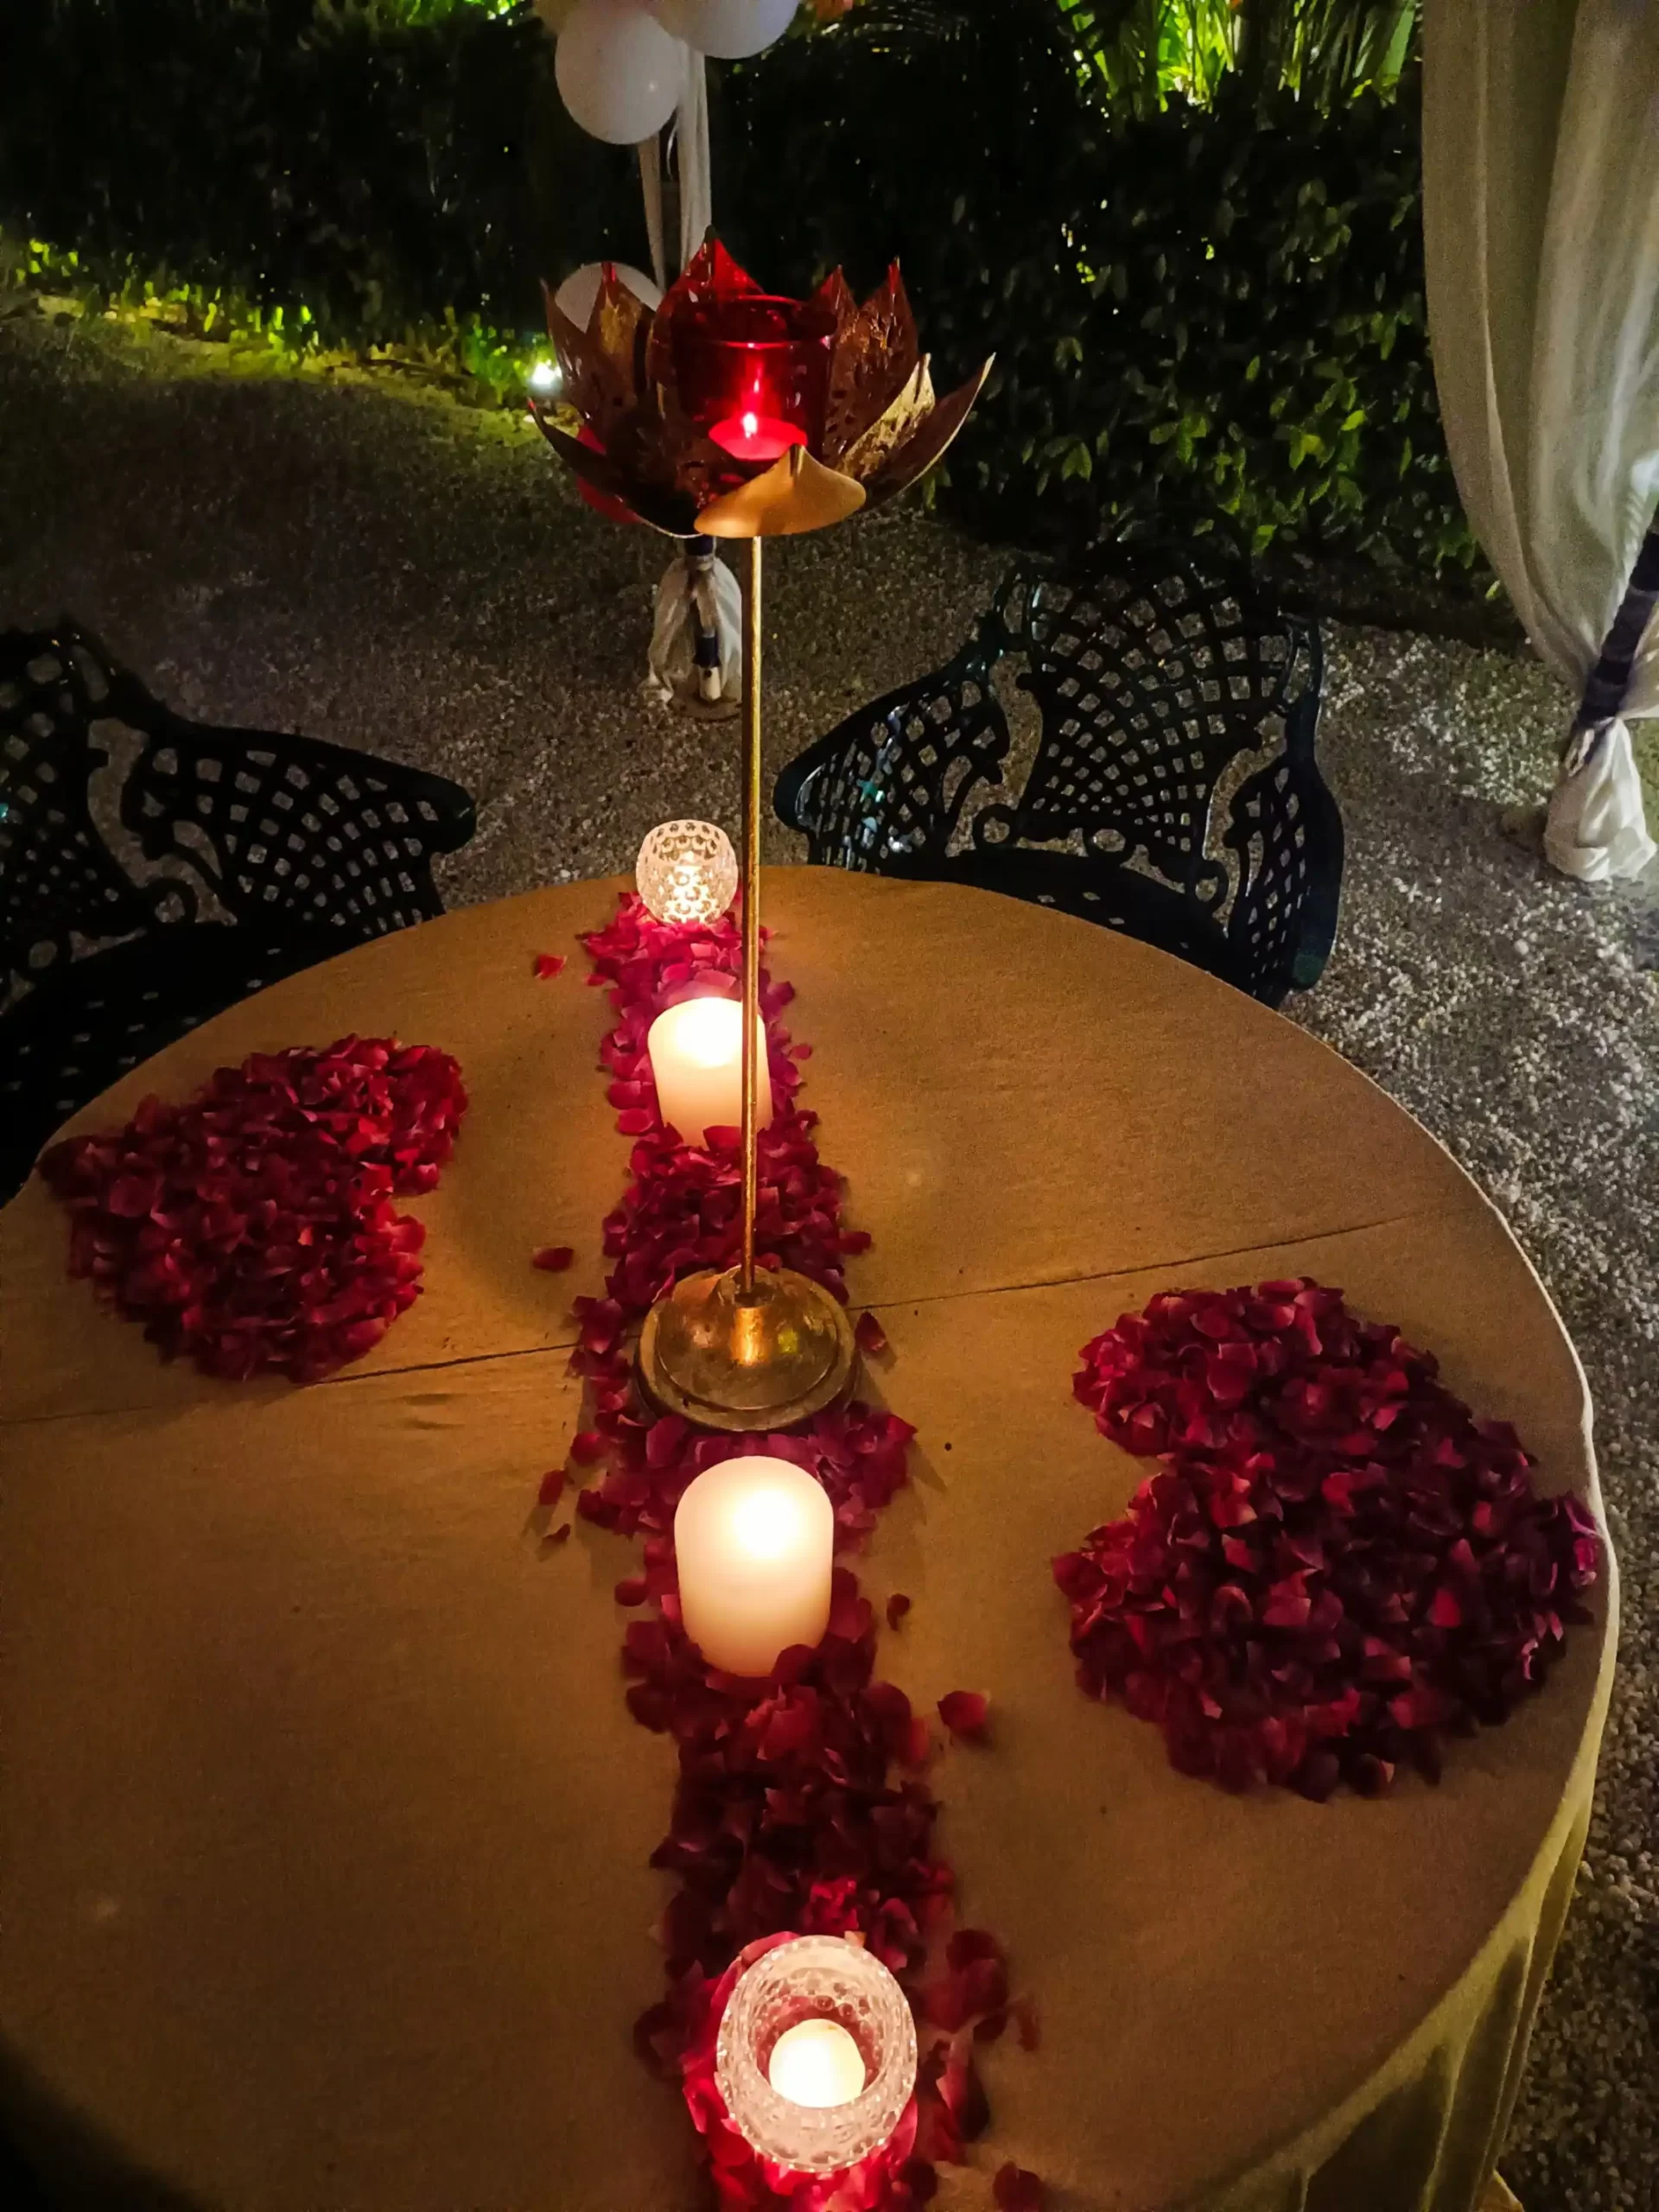 Romantic Candle Light Table Decorations For V Day! - Boldsky.com